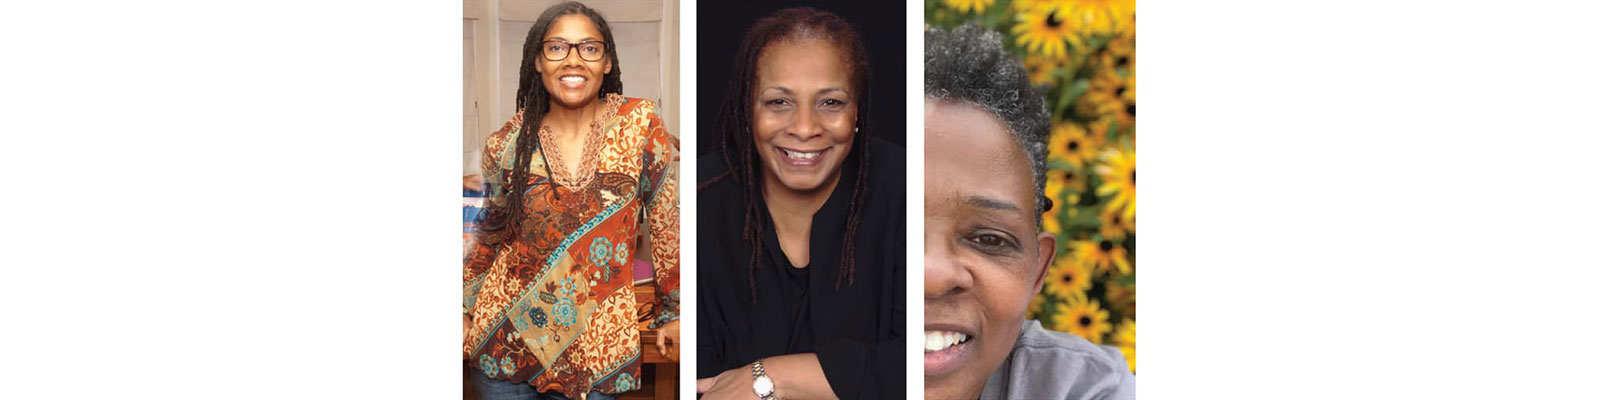 Arete Celebrates Black History Month With a Commanding Trio of Black Female Artists